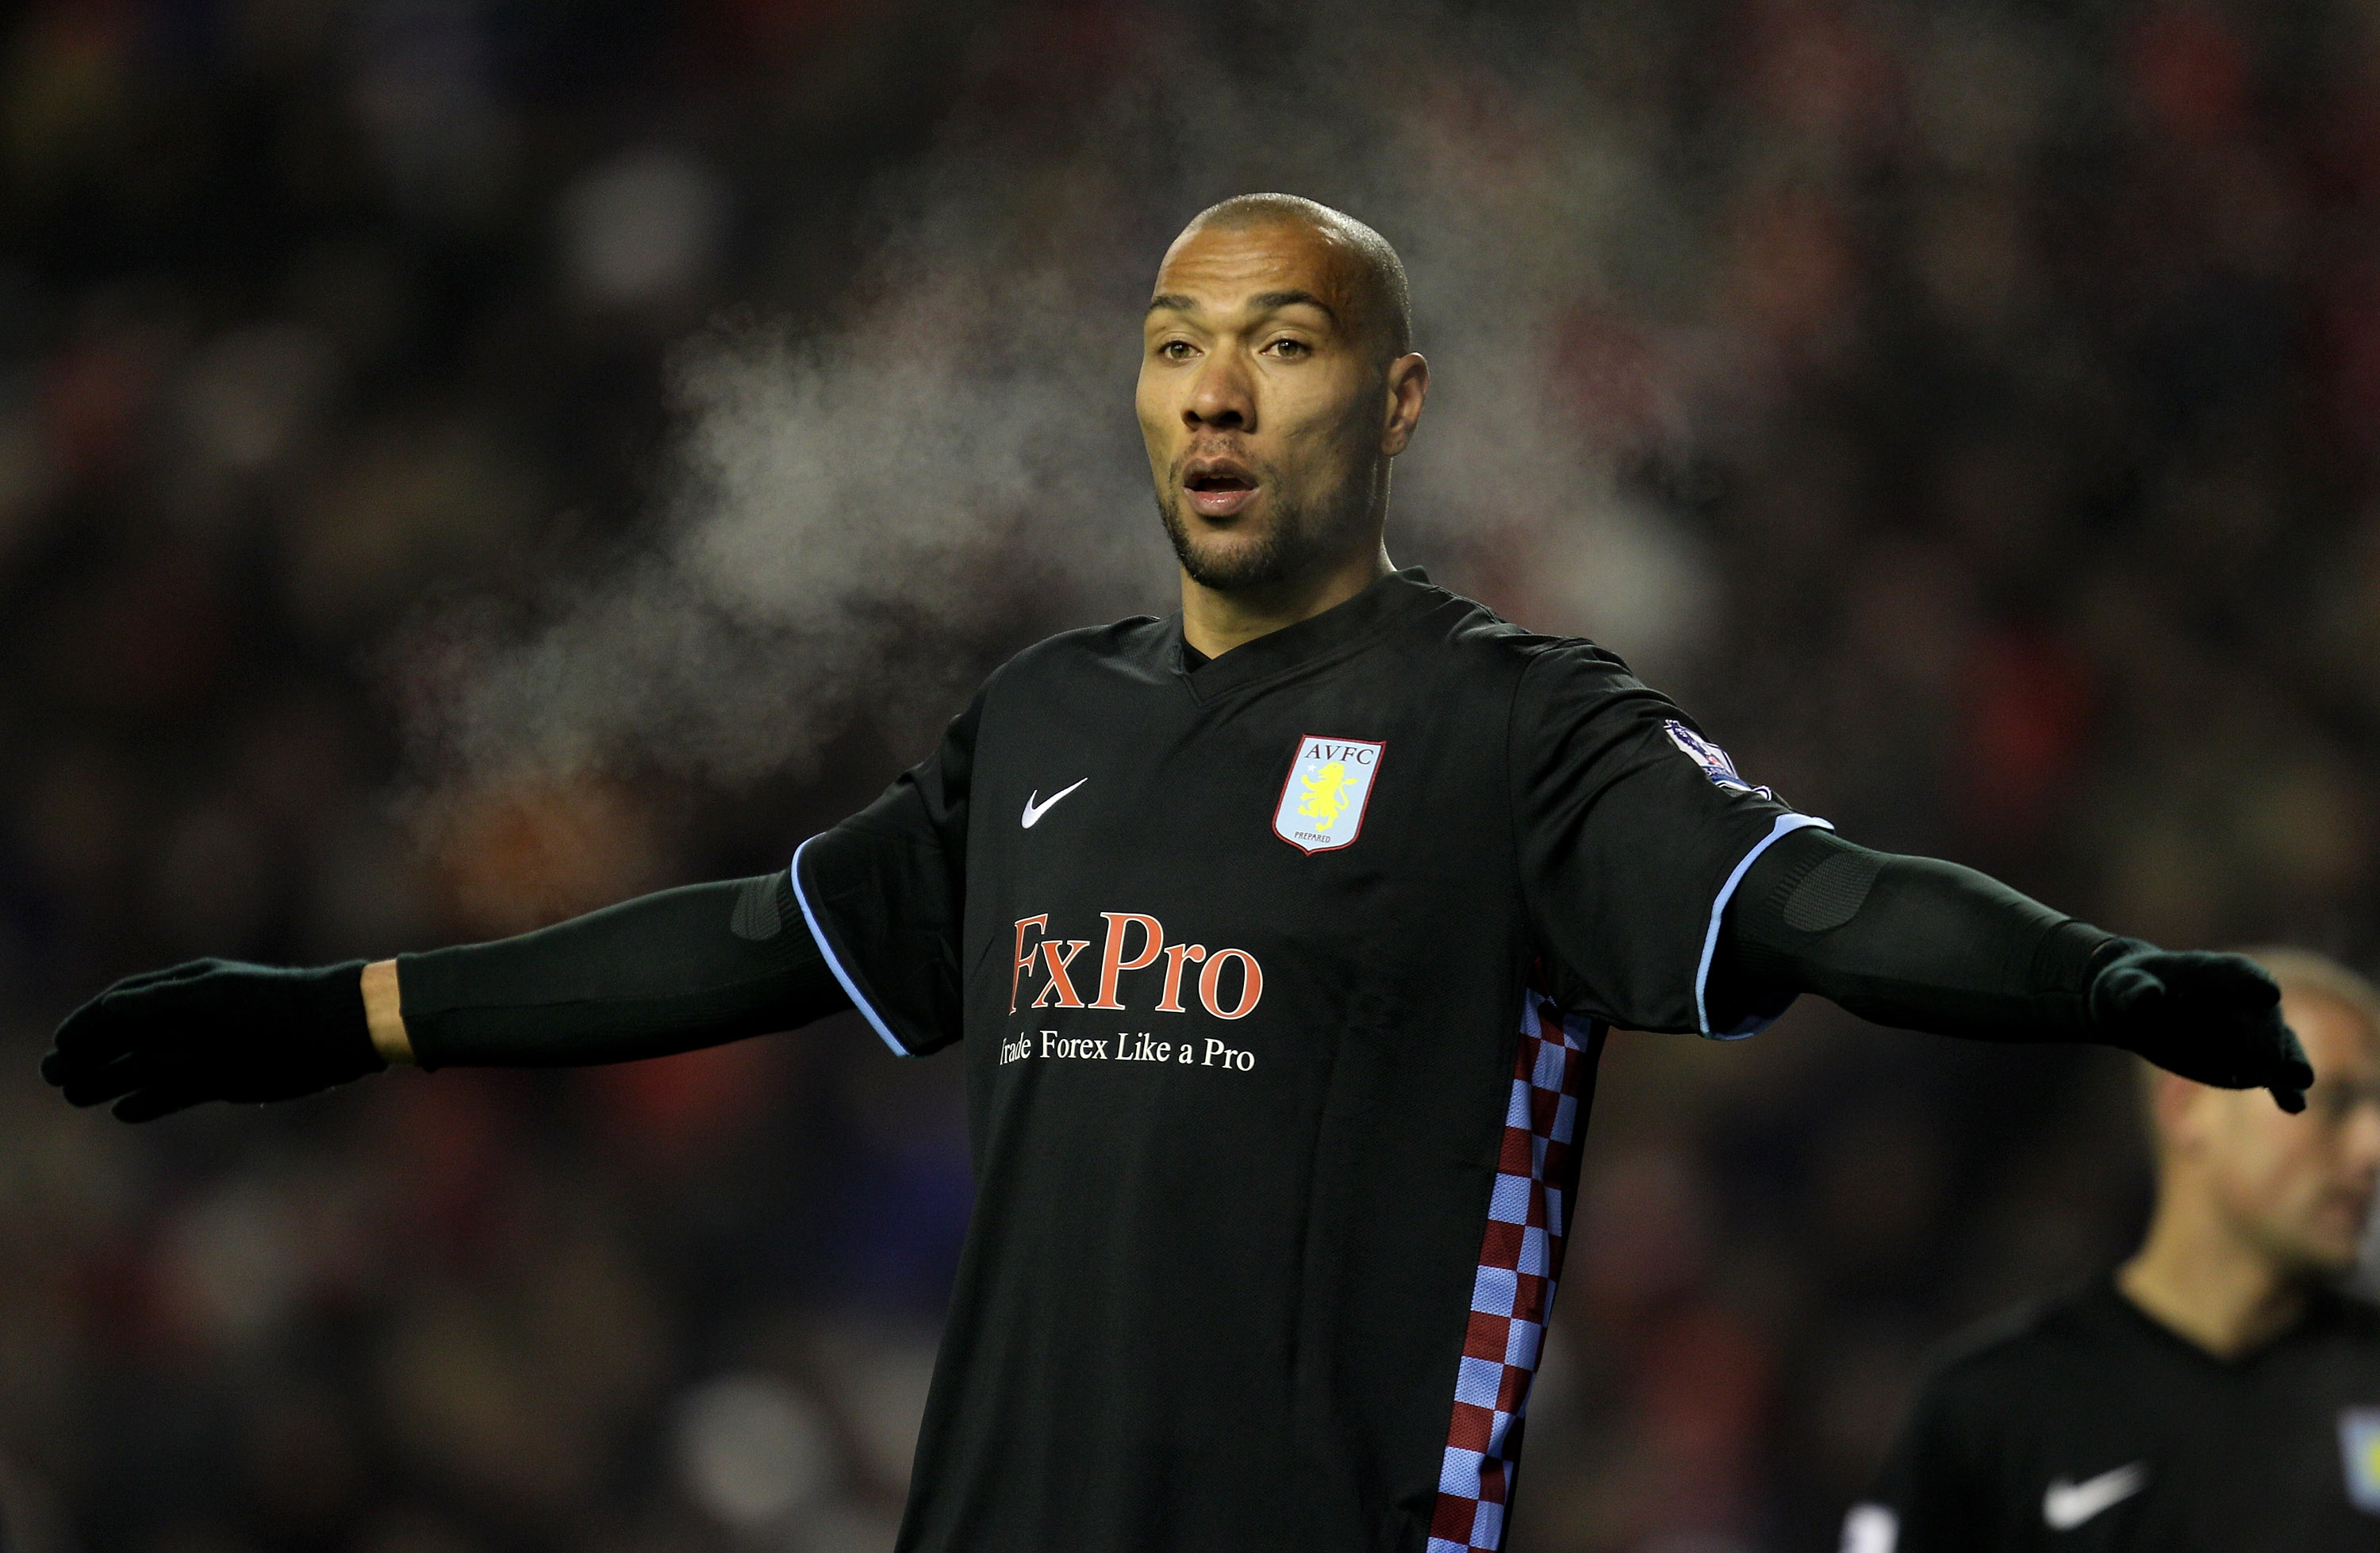 LIVERPOOL, ENGLAND - DECEMBER 06:  John Carew of Aston Villa looks on during the Barclays Premier League match between Liverpool and Aston Villa at Anfield on December 6, 2010 in Liverpool, England. (Photo by Mark Thompson/Getty Images)